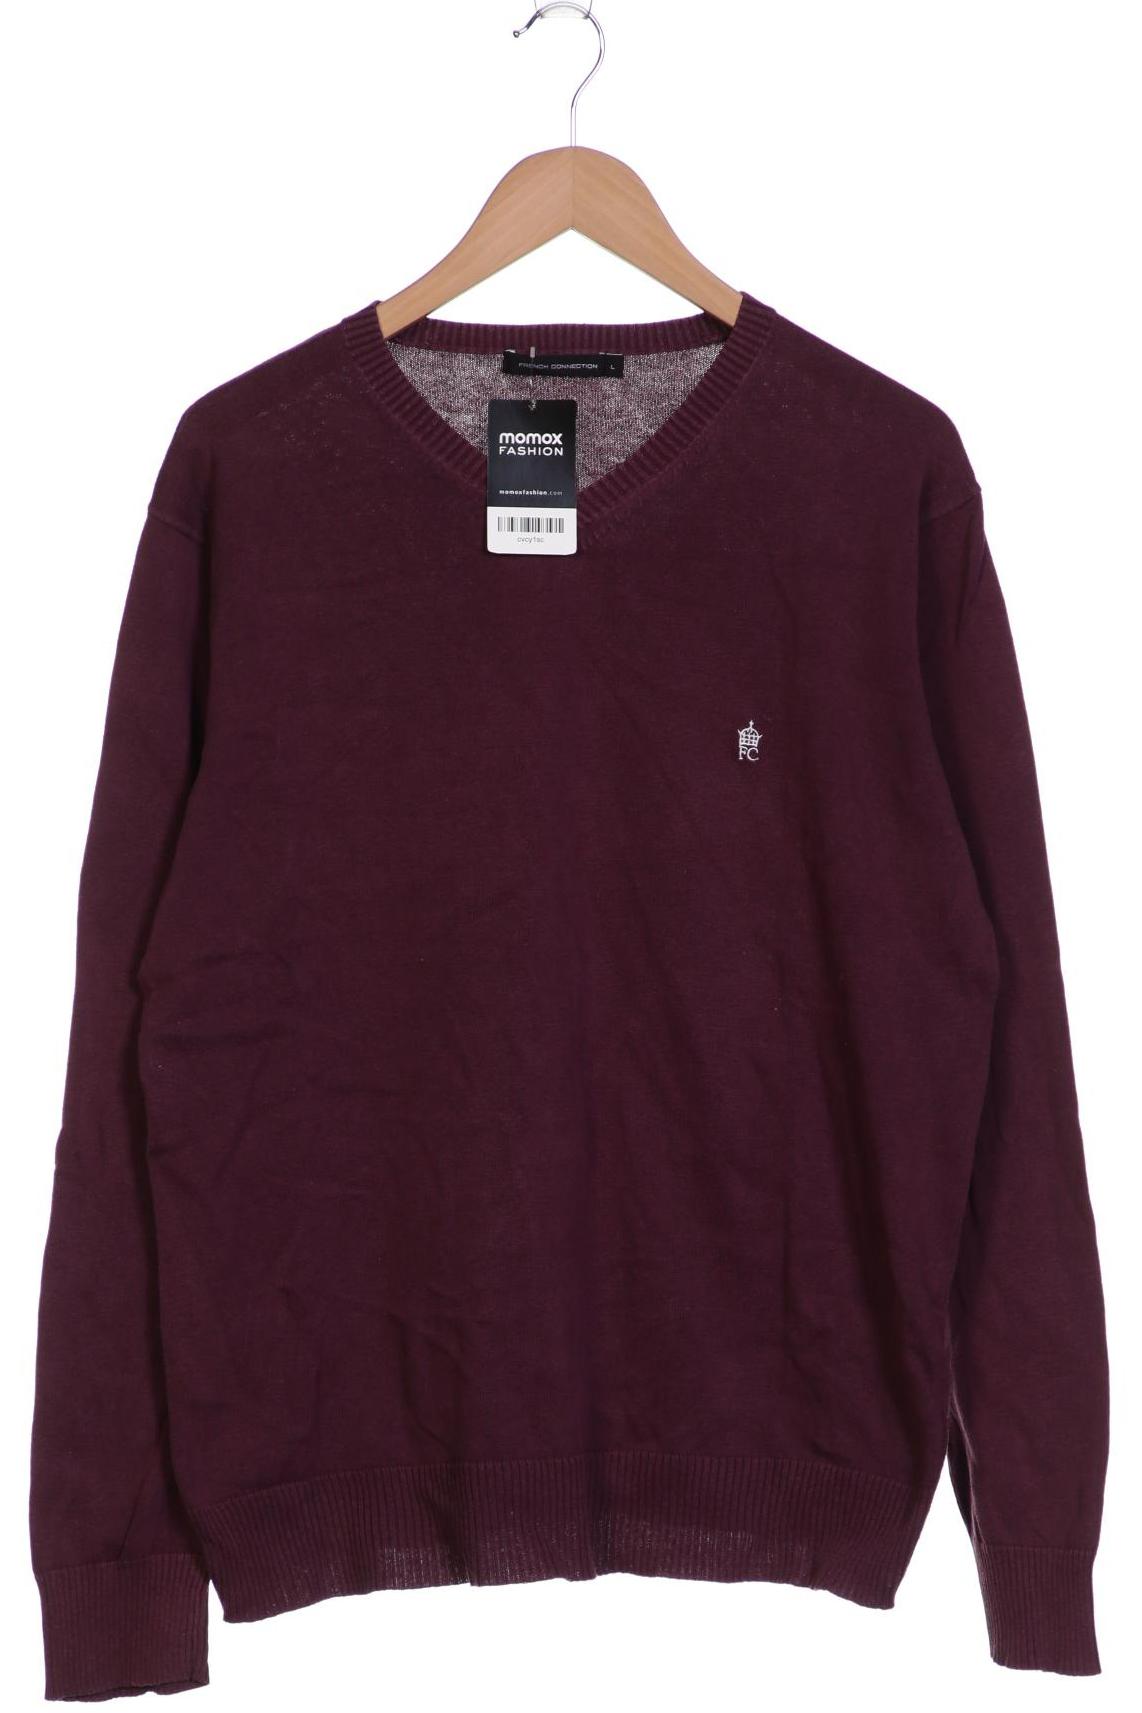 French Connection Herren Pullover, bordeaux von French Connection